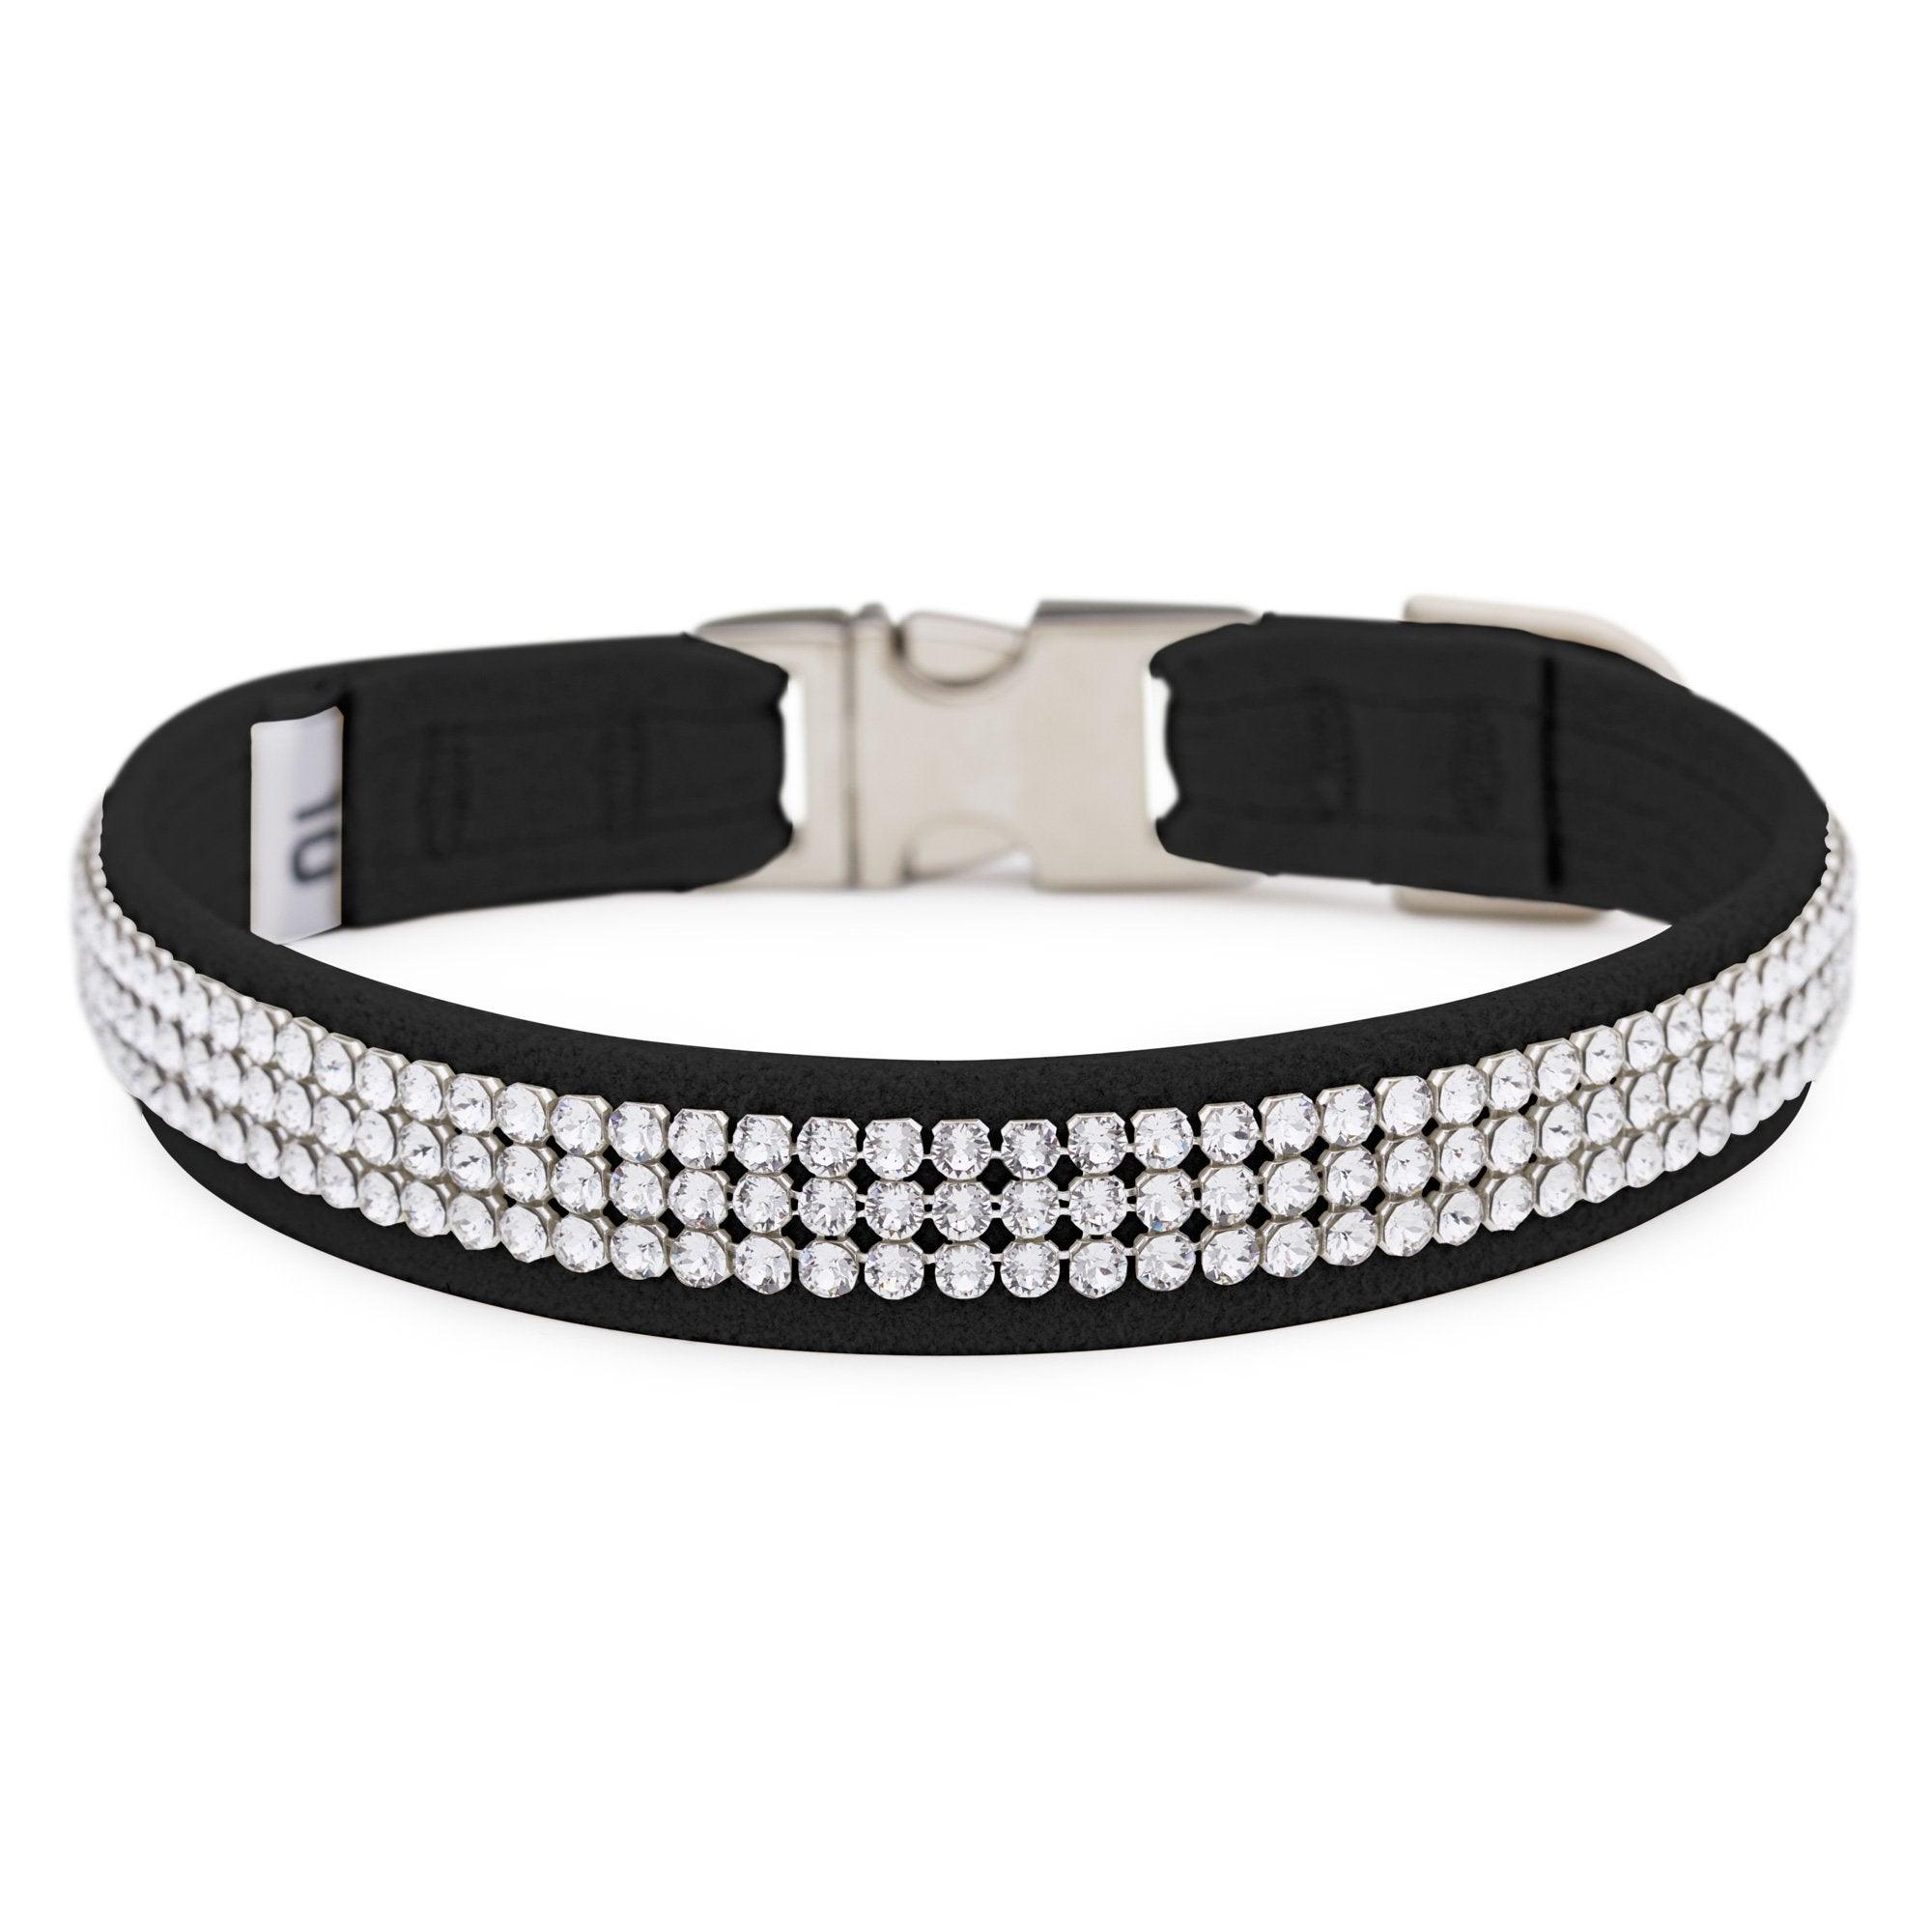 Black 3 Row Giltmore Perfect Fit Collar - Rocky & Maggie's Pet Boutique and Salon